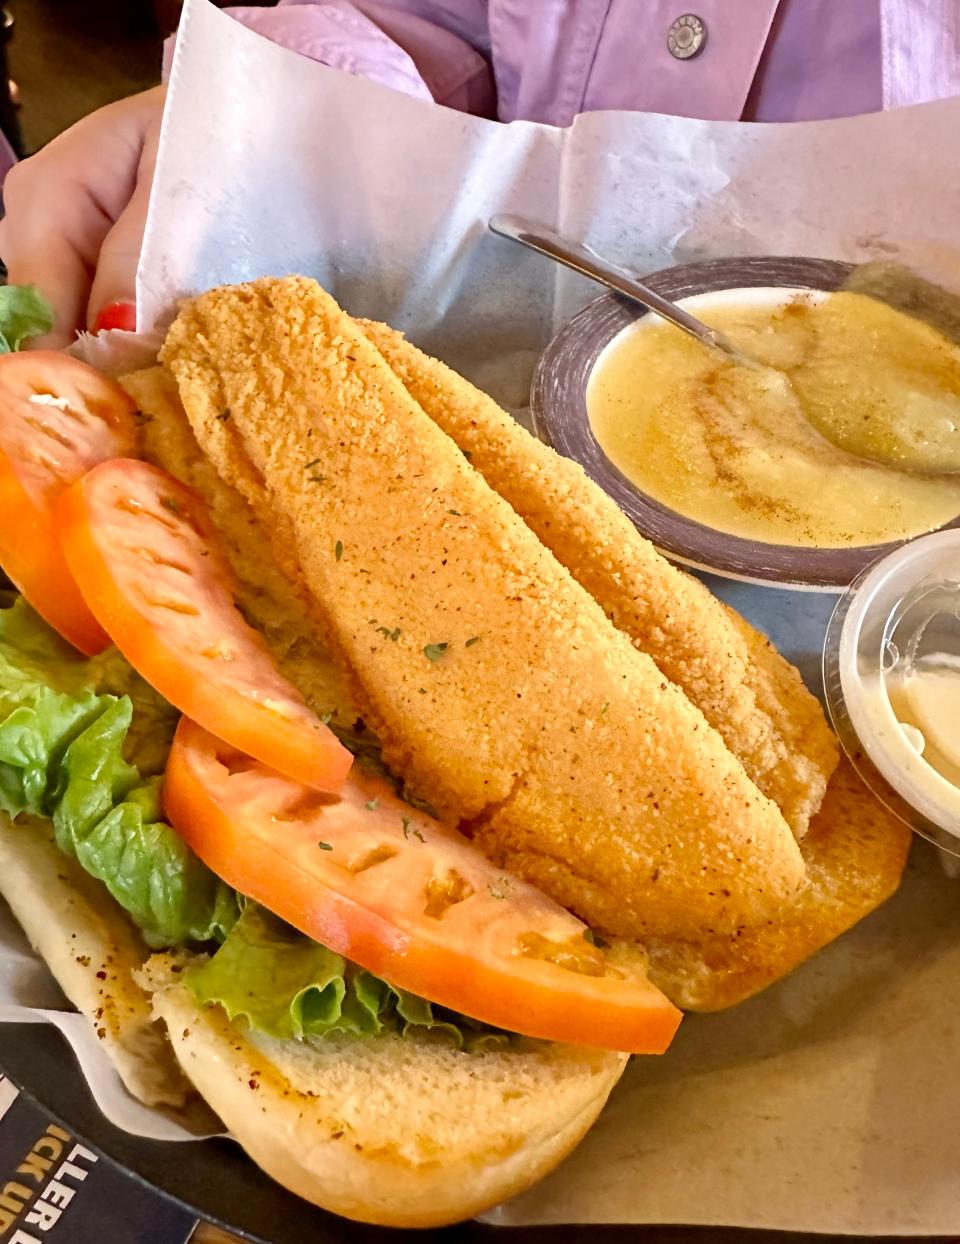 A generous fried fish sandwich on a fresh hoagie bun is on the menu at Joey's Kendal Tavern in Massillon.